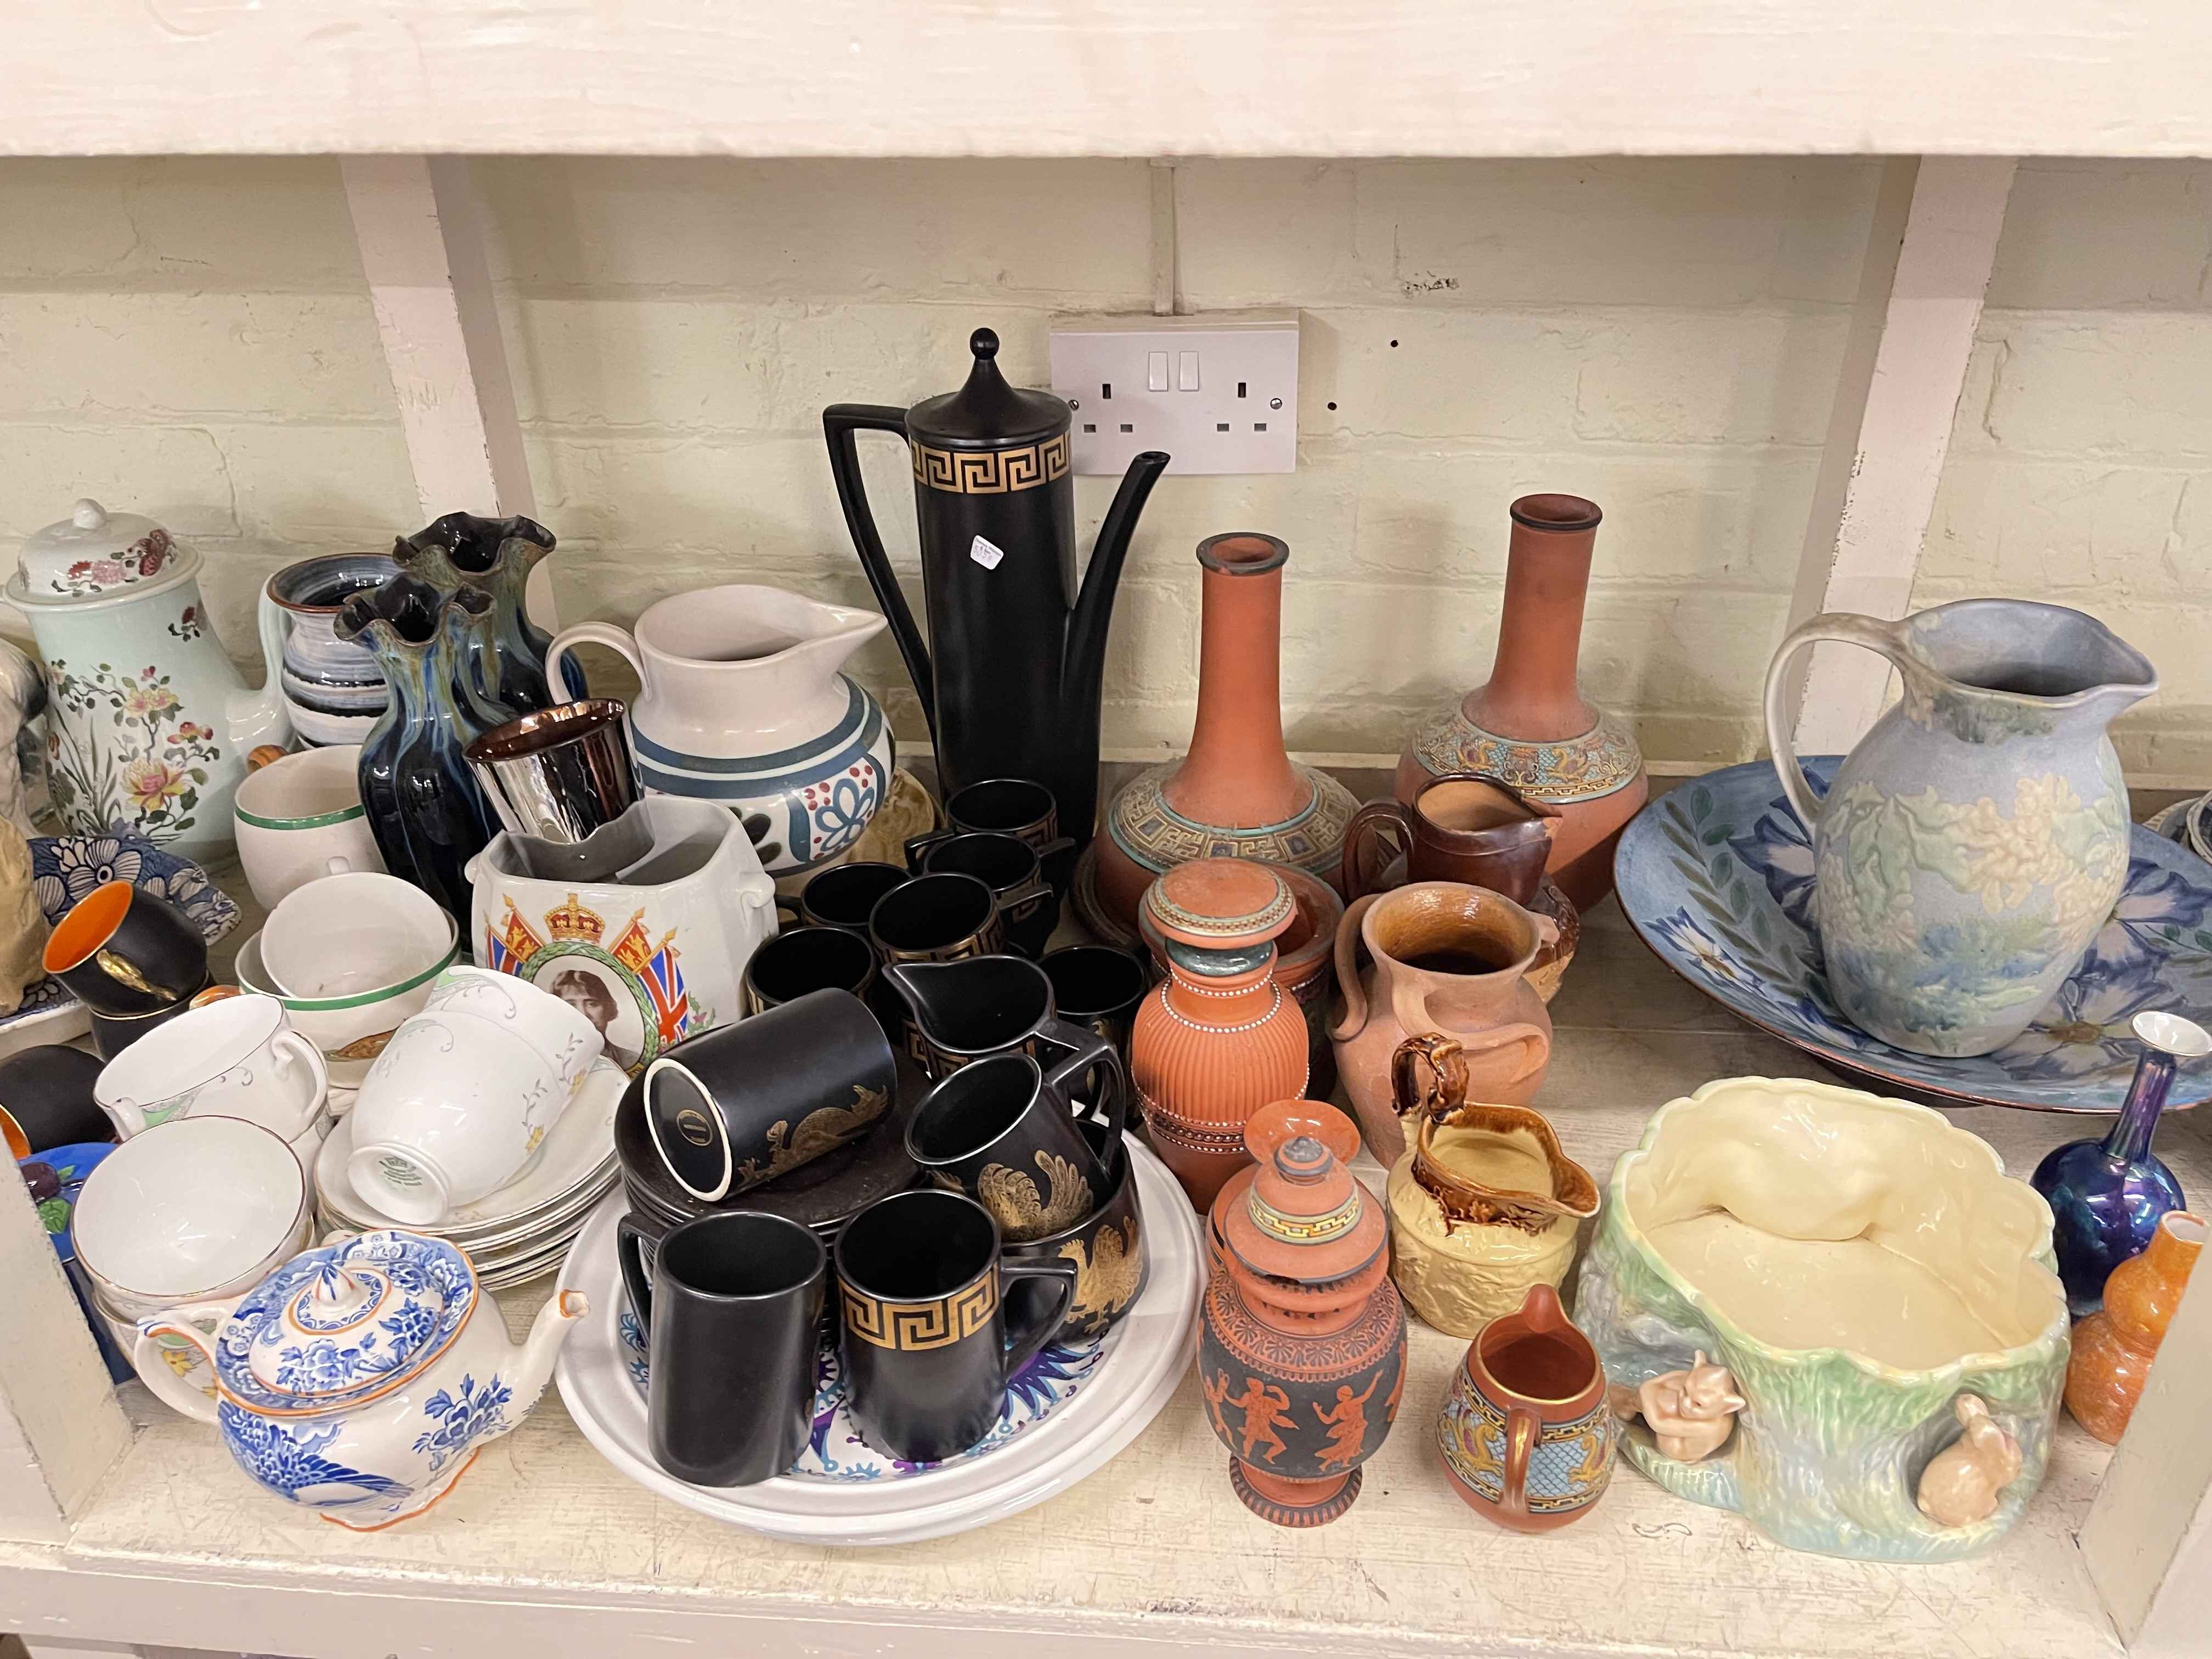 Large collection of decorative pottery, Maling, Poole, Carlton Ware, Ringtons, terracotta wares, - Image 2 of 5